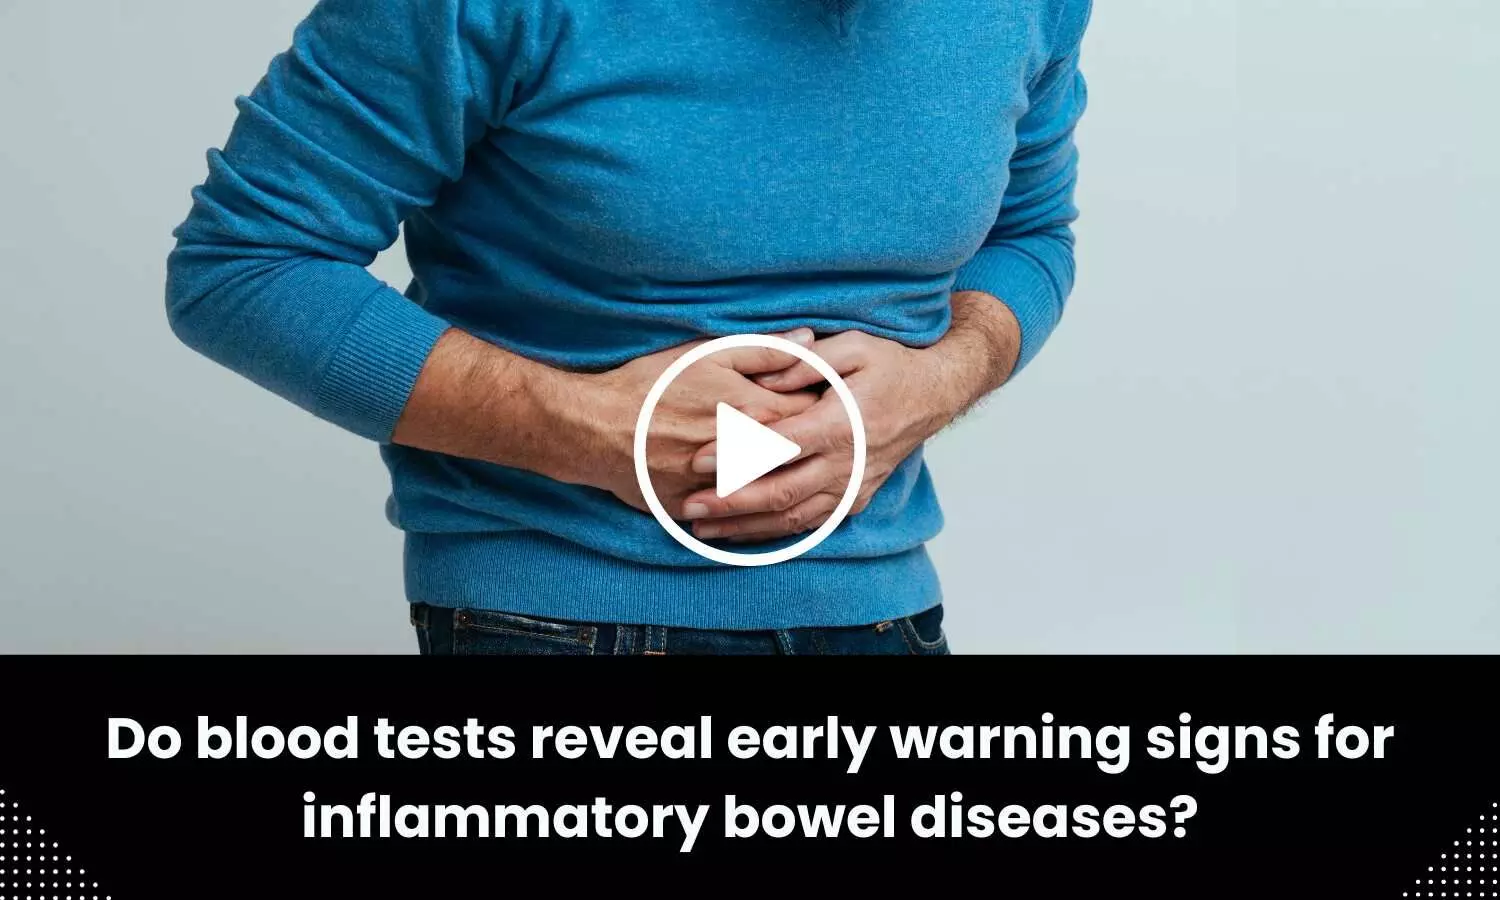 Do blood tests reveal early warning signs for inflammatory bowel diseases?